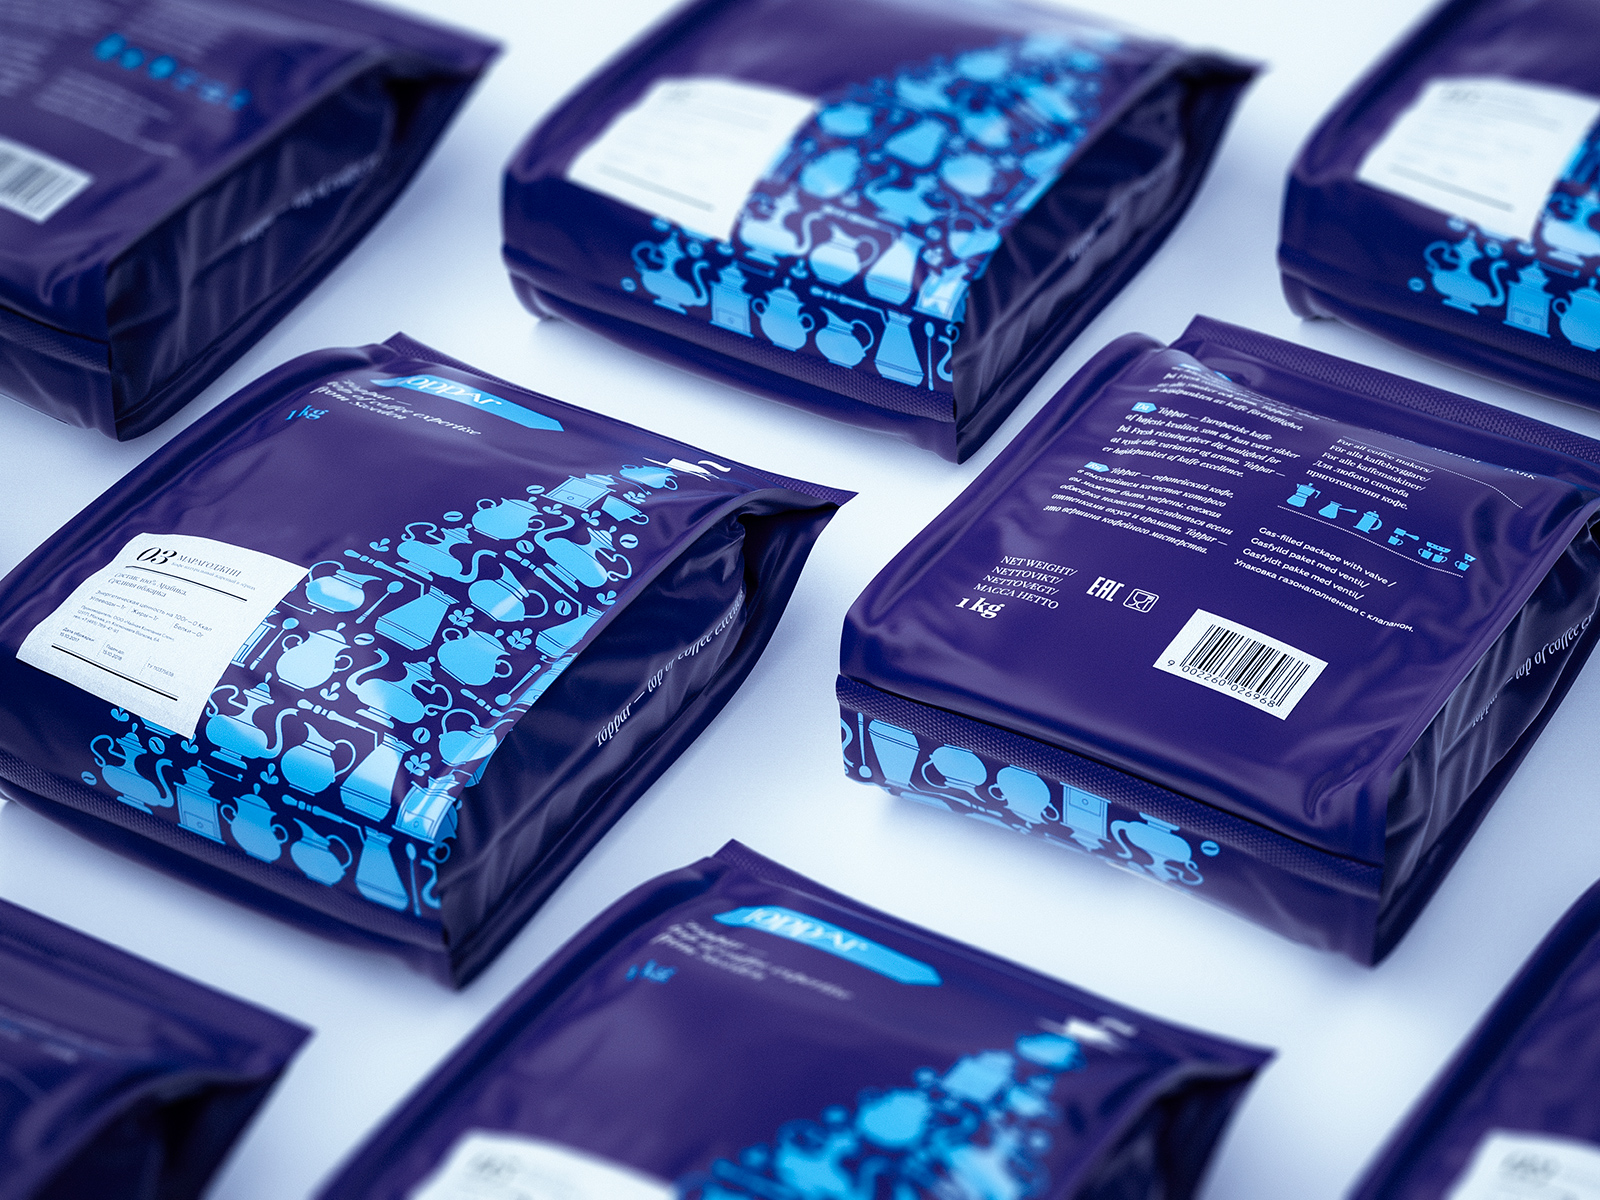 Coffee Beans Brand and Packaging Design for Russian Market